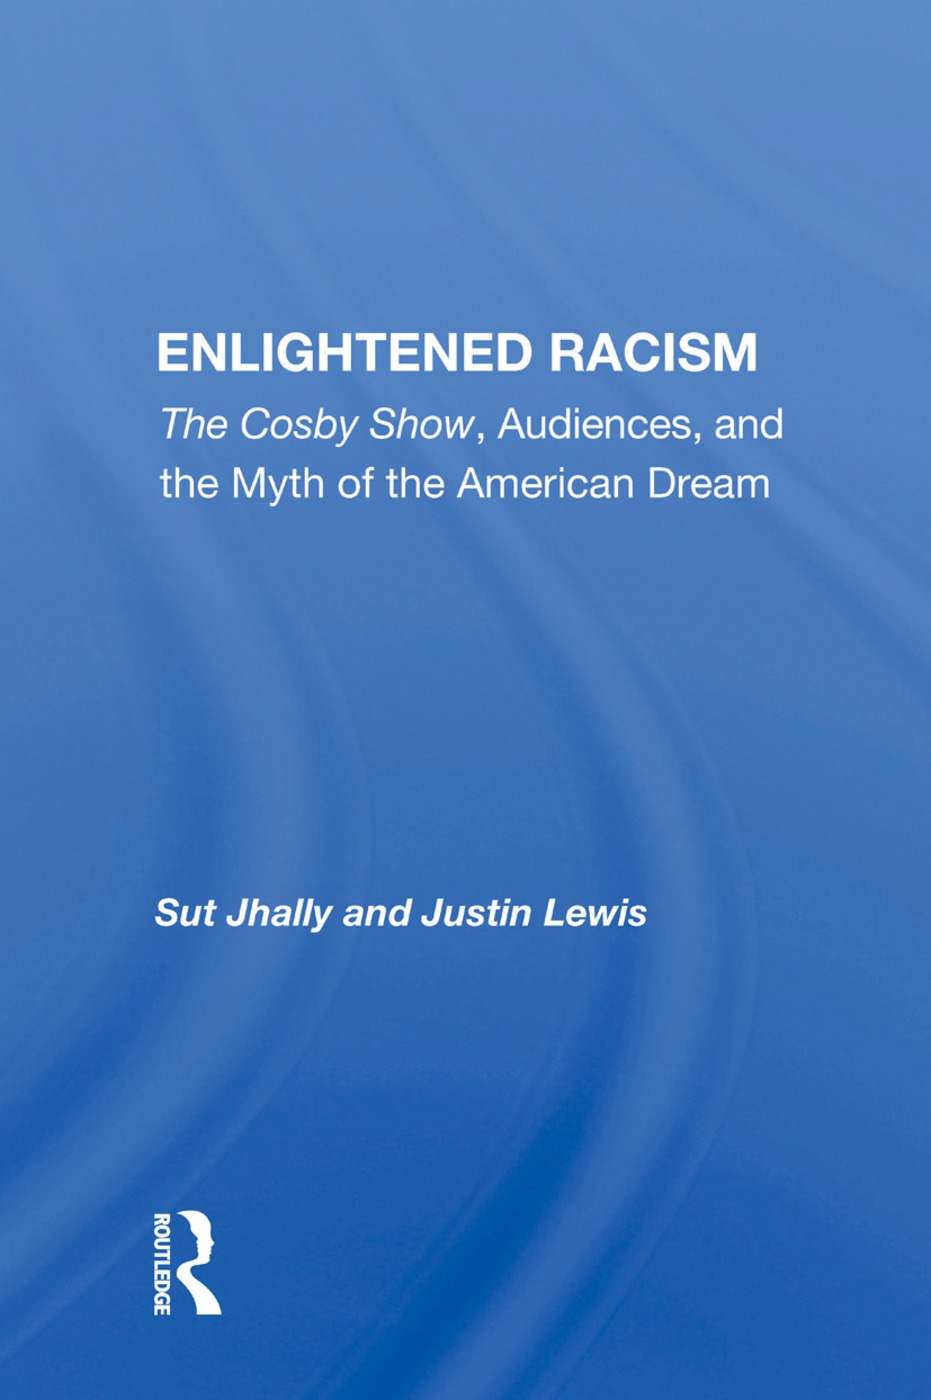 Enlightened Racism: the Cosby Show, Audiences, and the Myth of the American Dream